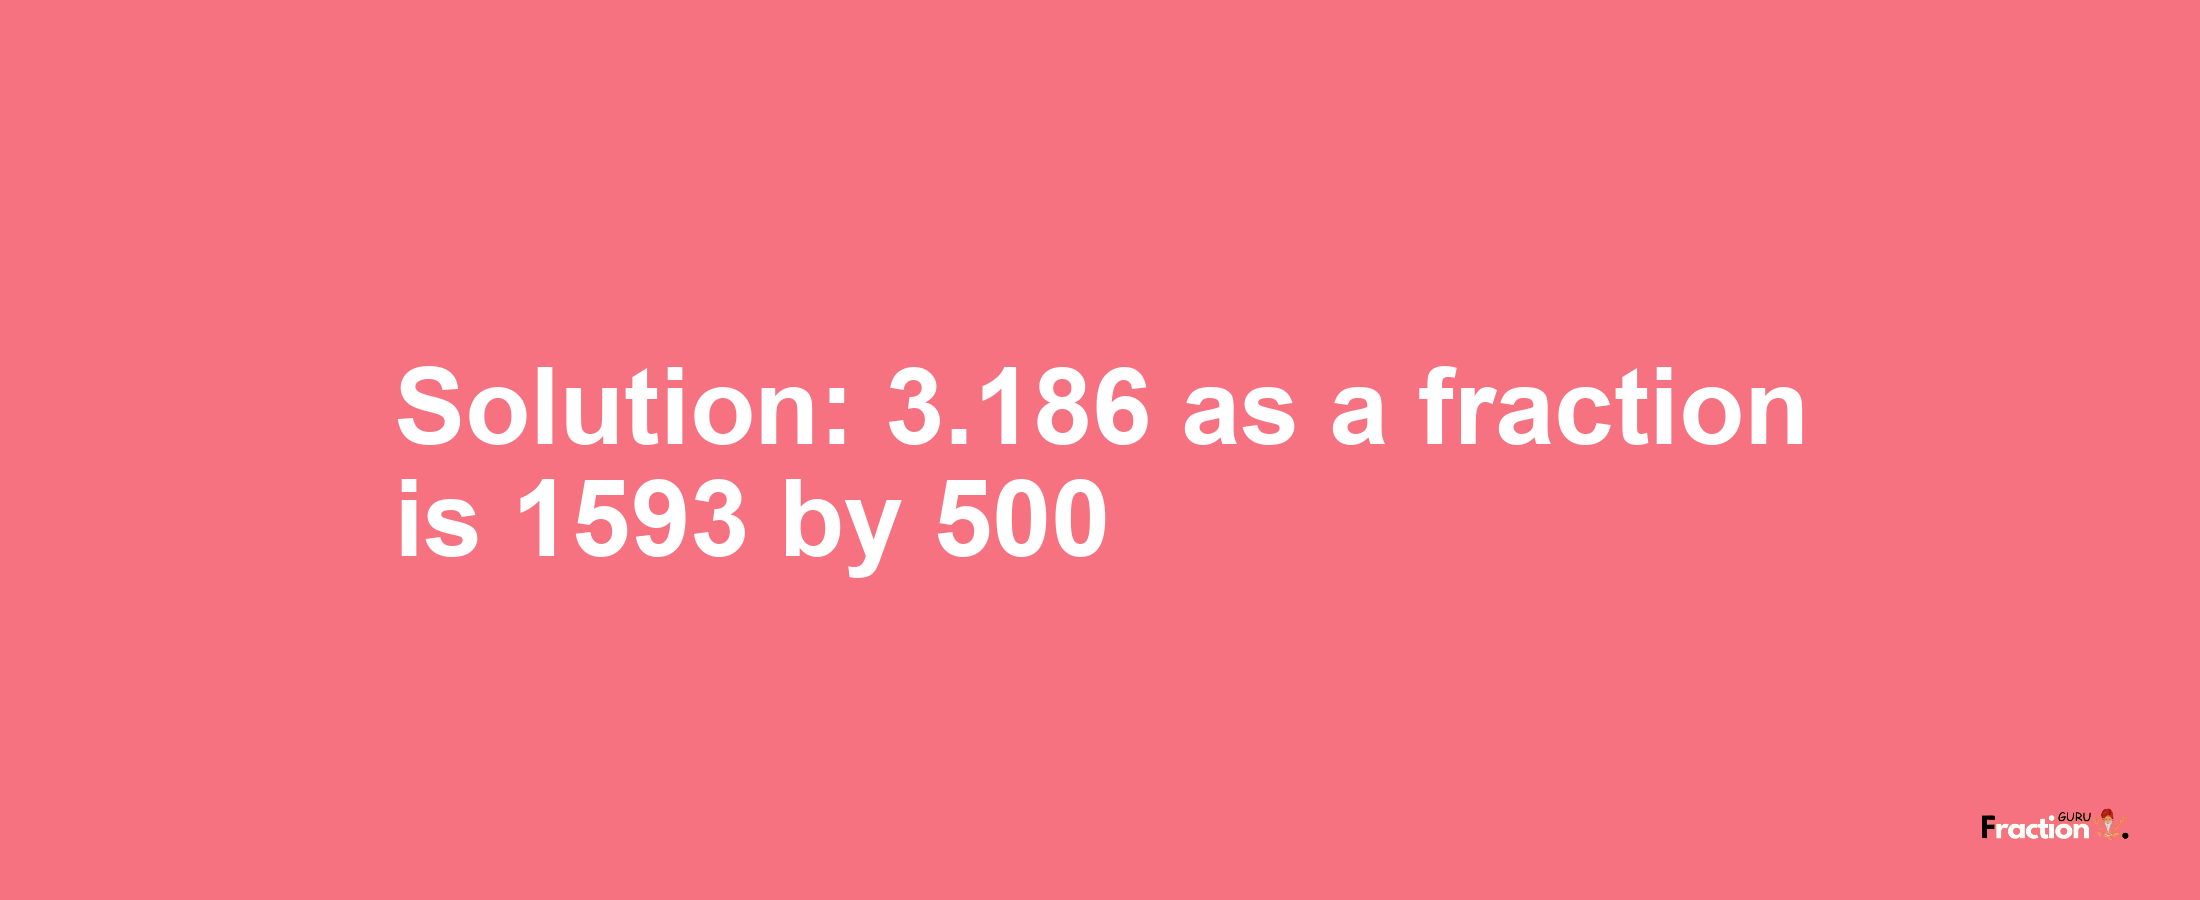 Solution:3.186 as a fraction is 1593/500